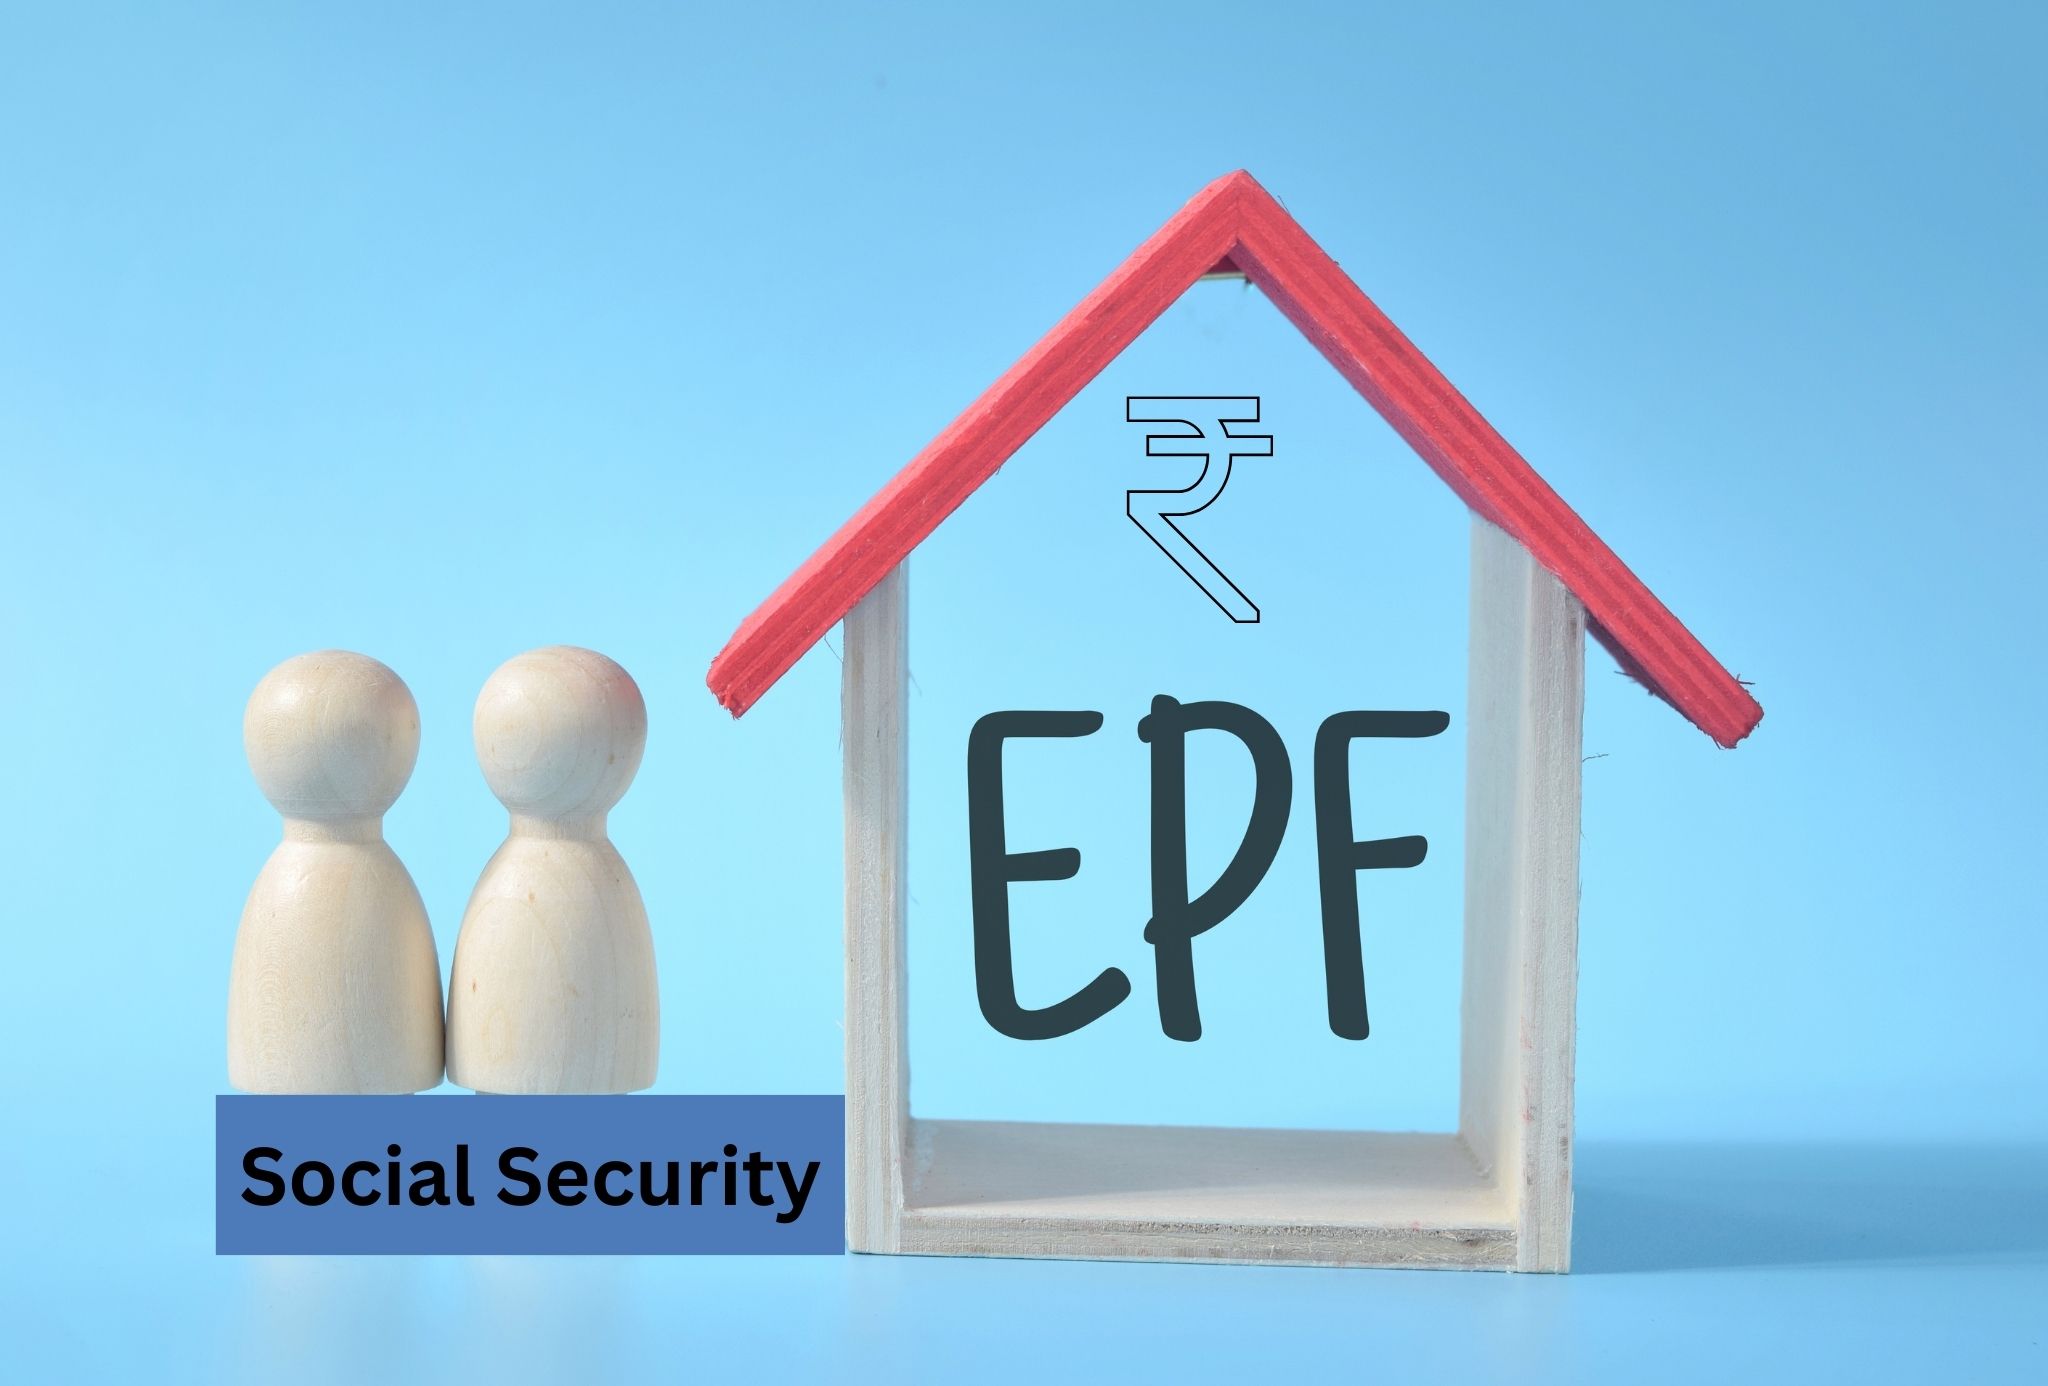 Let’s Expand Social Security: Provident Fund Reforms Are Vital For India